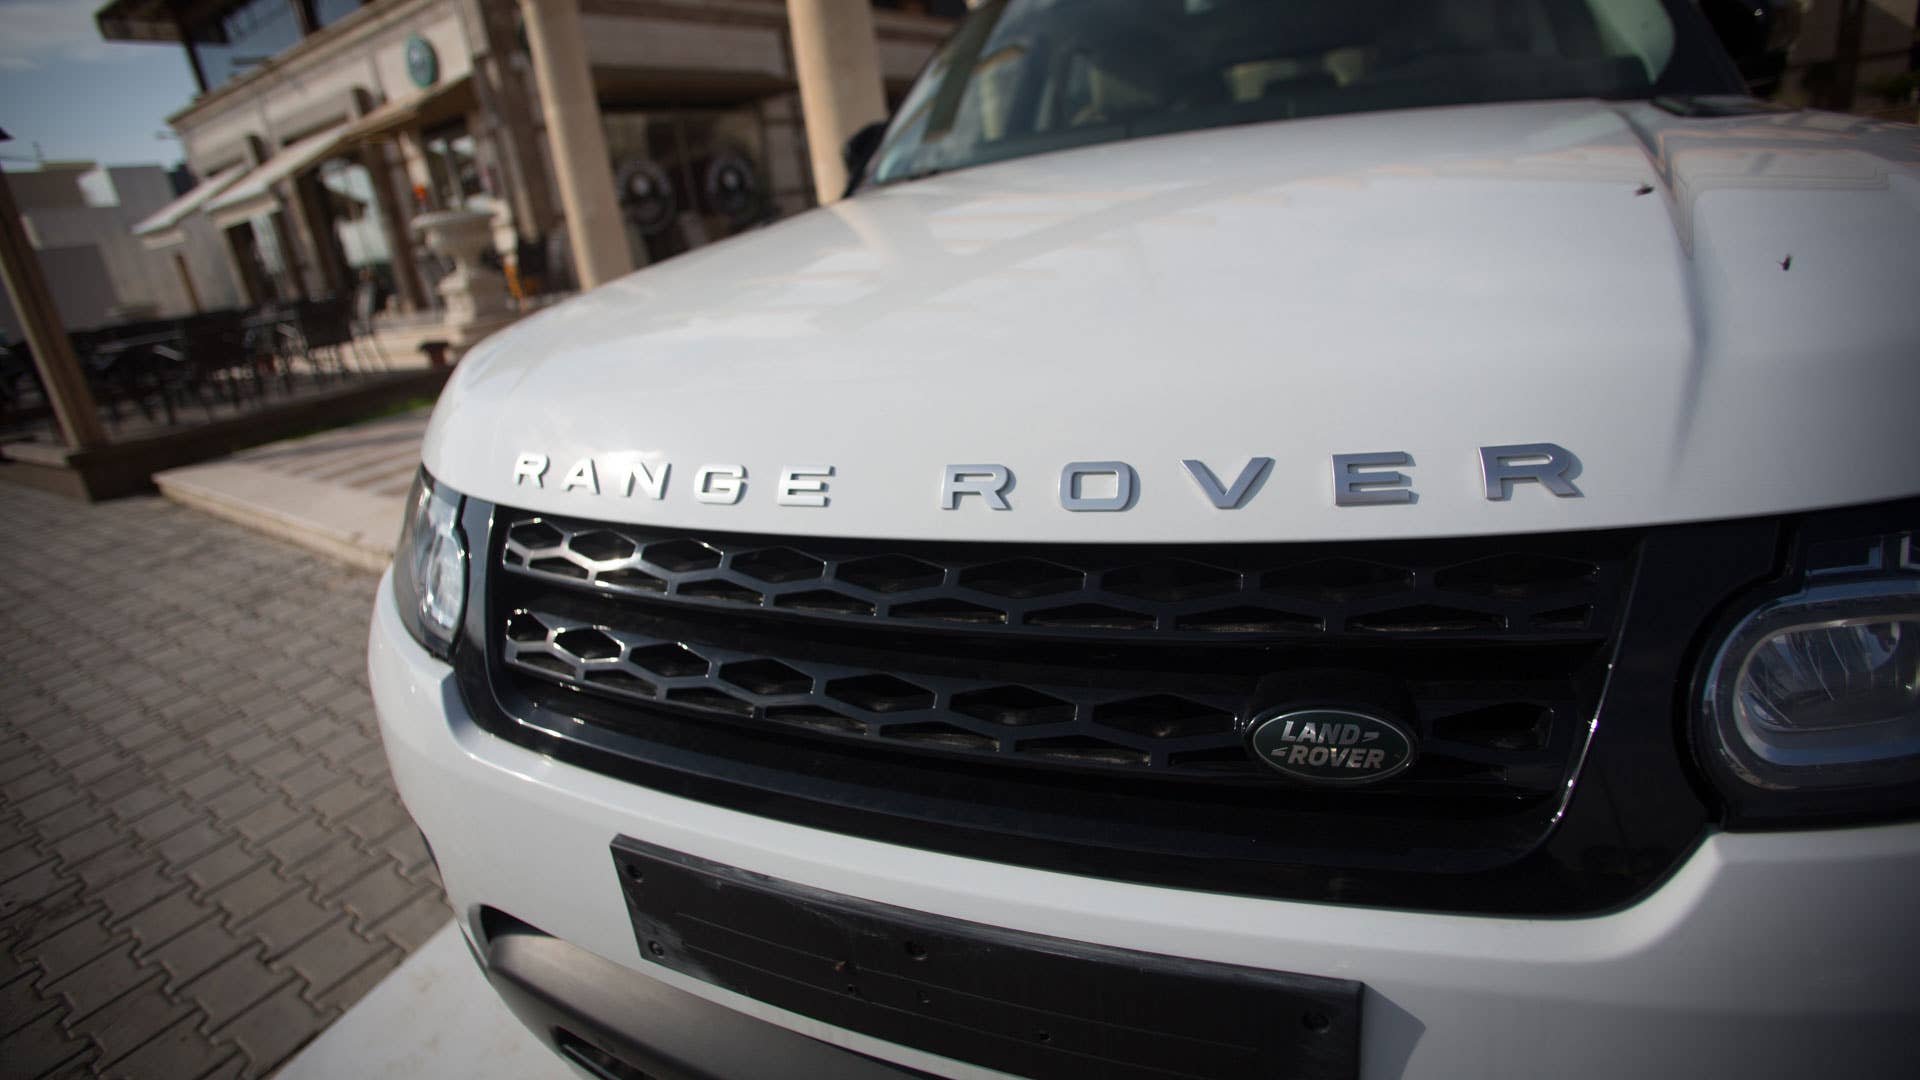 A Range Rover is displayed for sale outside a restaurant complex.